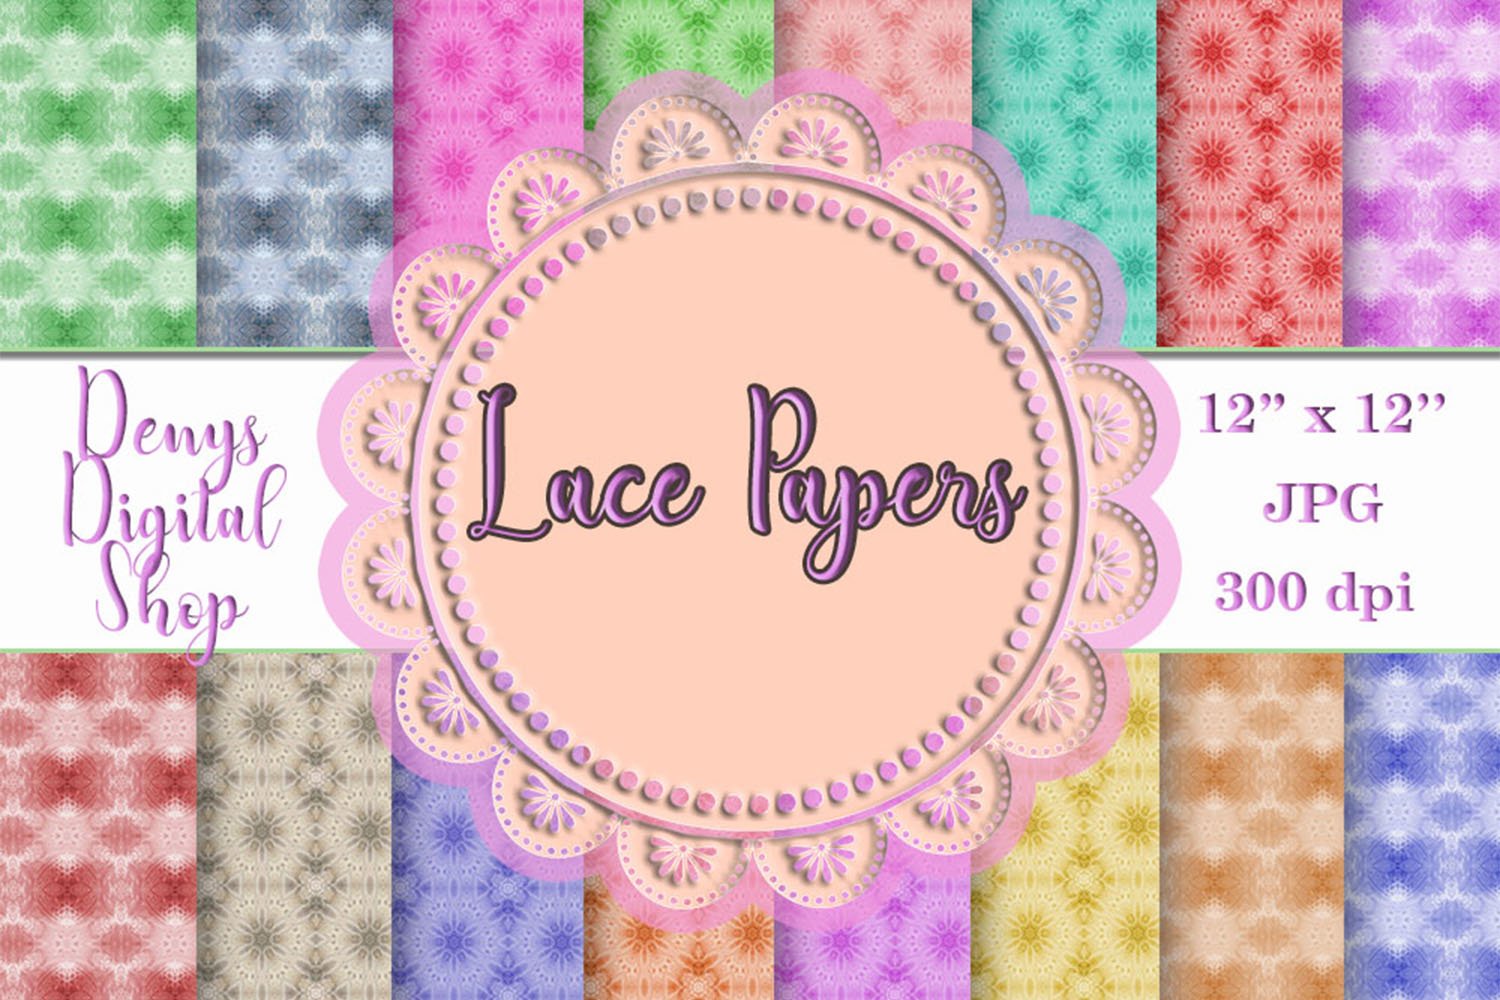 Lace Papers Cover.